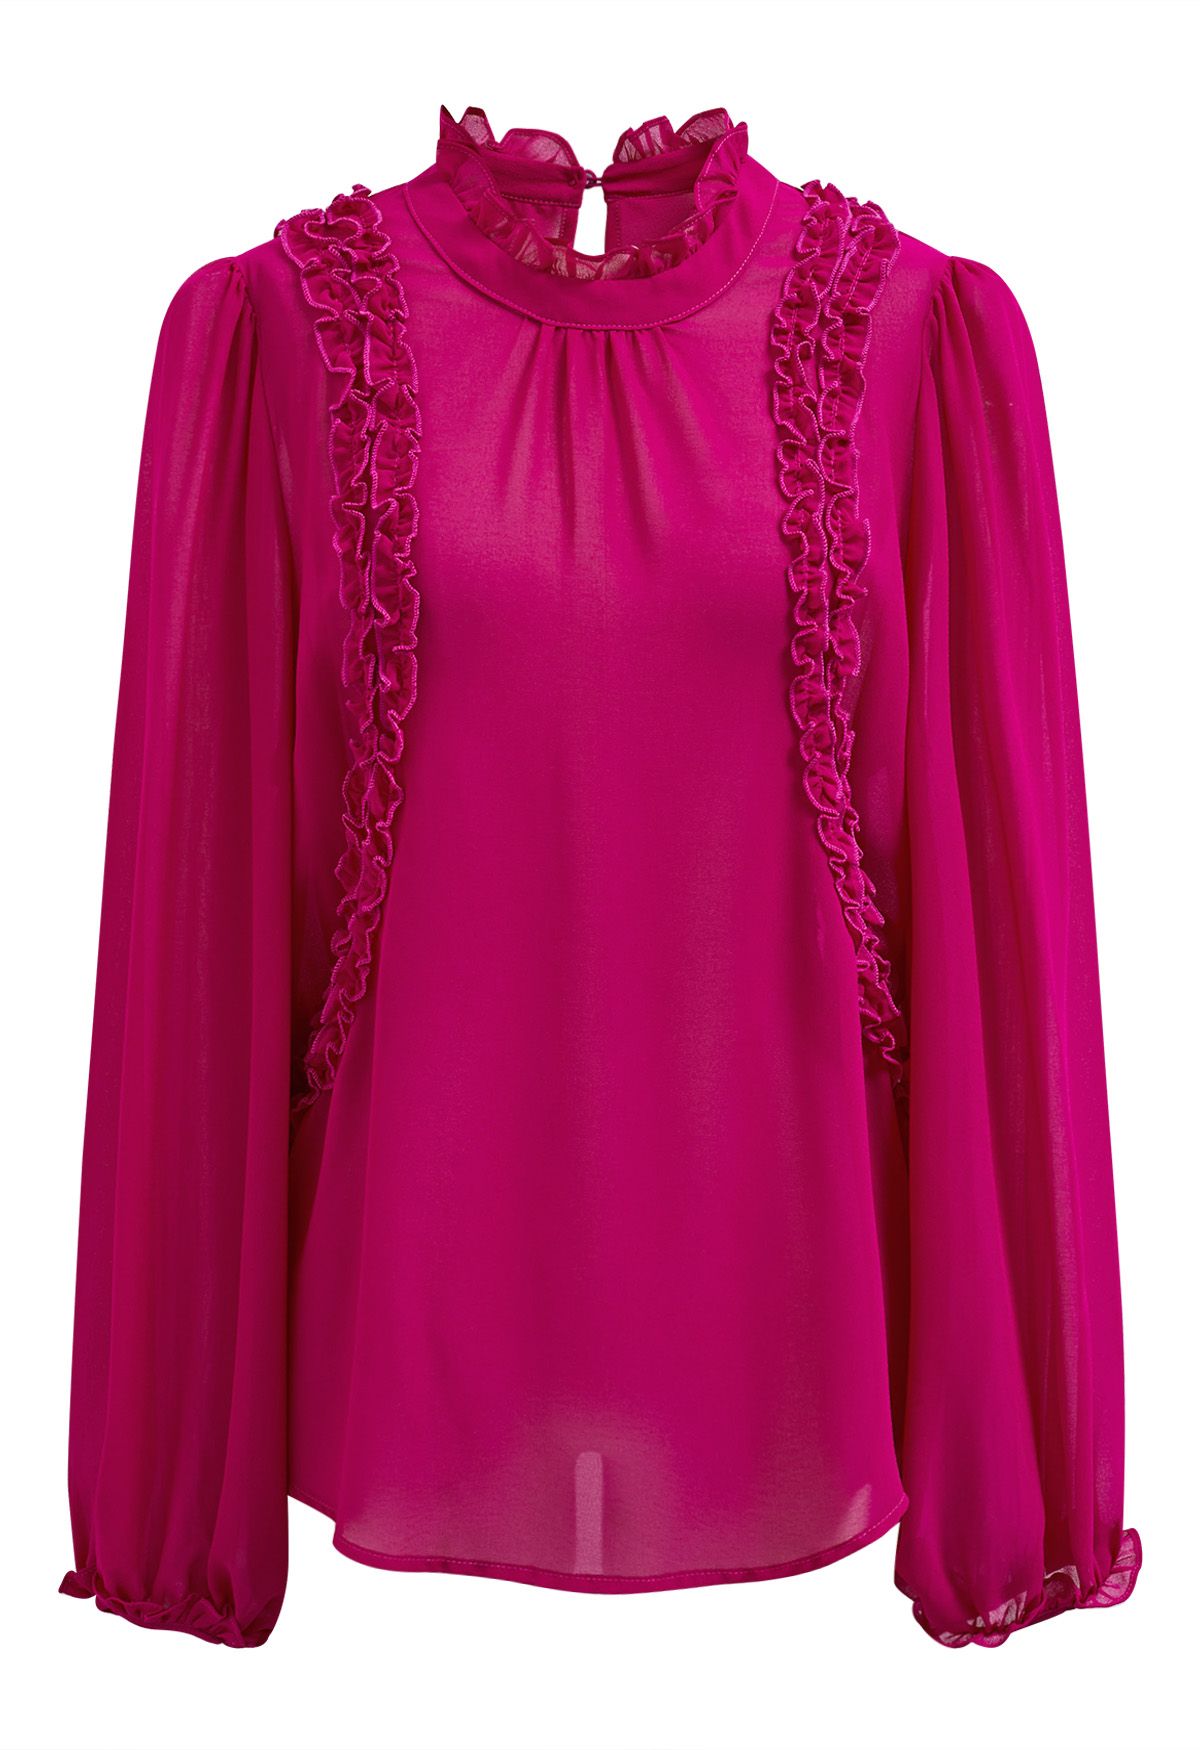 Ruffle Adorned Bubble Sleeves Chiffon Top in Hot Pink